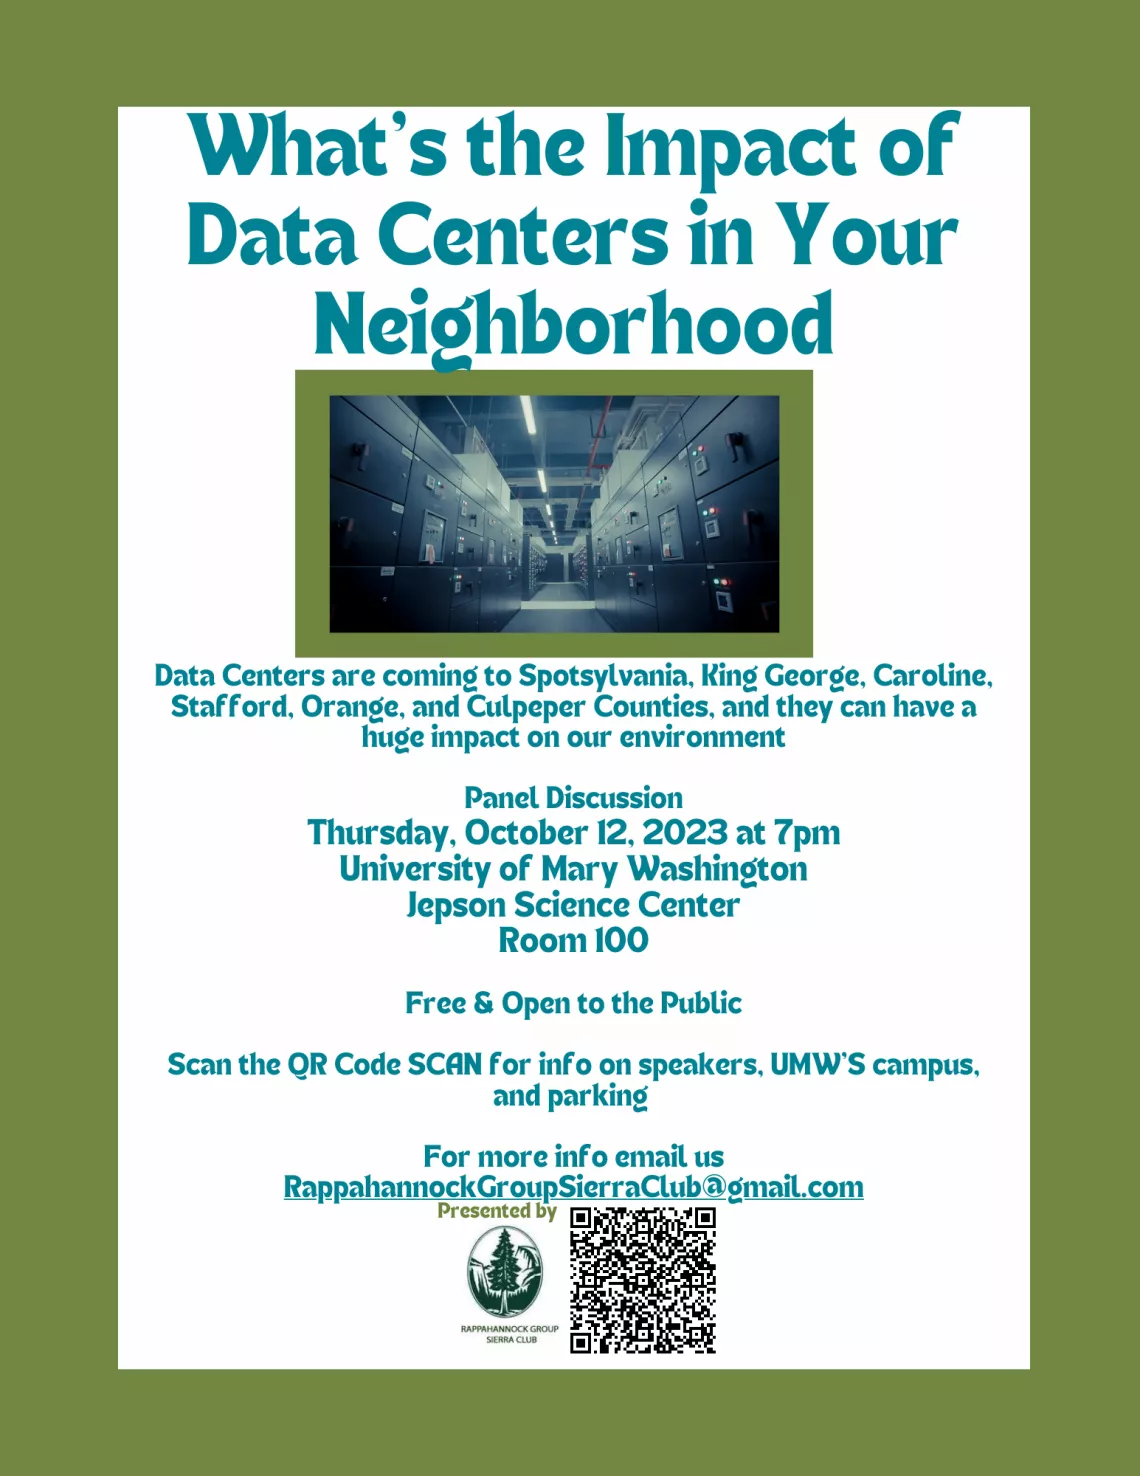 Flyer for "What's the Impact of Data Centers in Your Neighborhood." It reads Data Centers are coming to Spotsylvania, King George, Caroline, Stafford, Orange, and Culpeper Counties, and they can have a huge impact on our environment. Panel Discussion Thursday, October 12, 2023 at 7pm University of Mary Washington Jepson Science Center Room 100. Free & Open to the Public  Scan the QR Code SCAN for info on speakers, UMW’S campus, and parking   For more info email us RappahannockGroupSierraClub@gmail.com